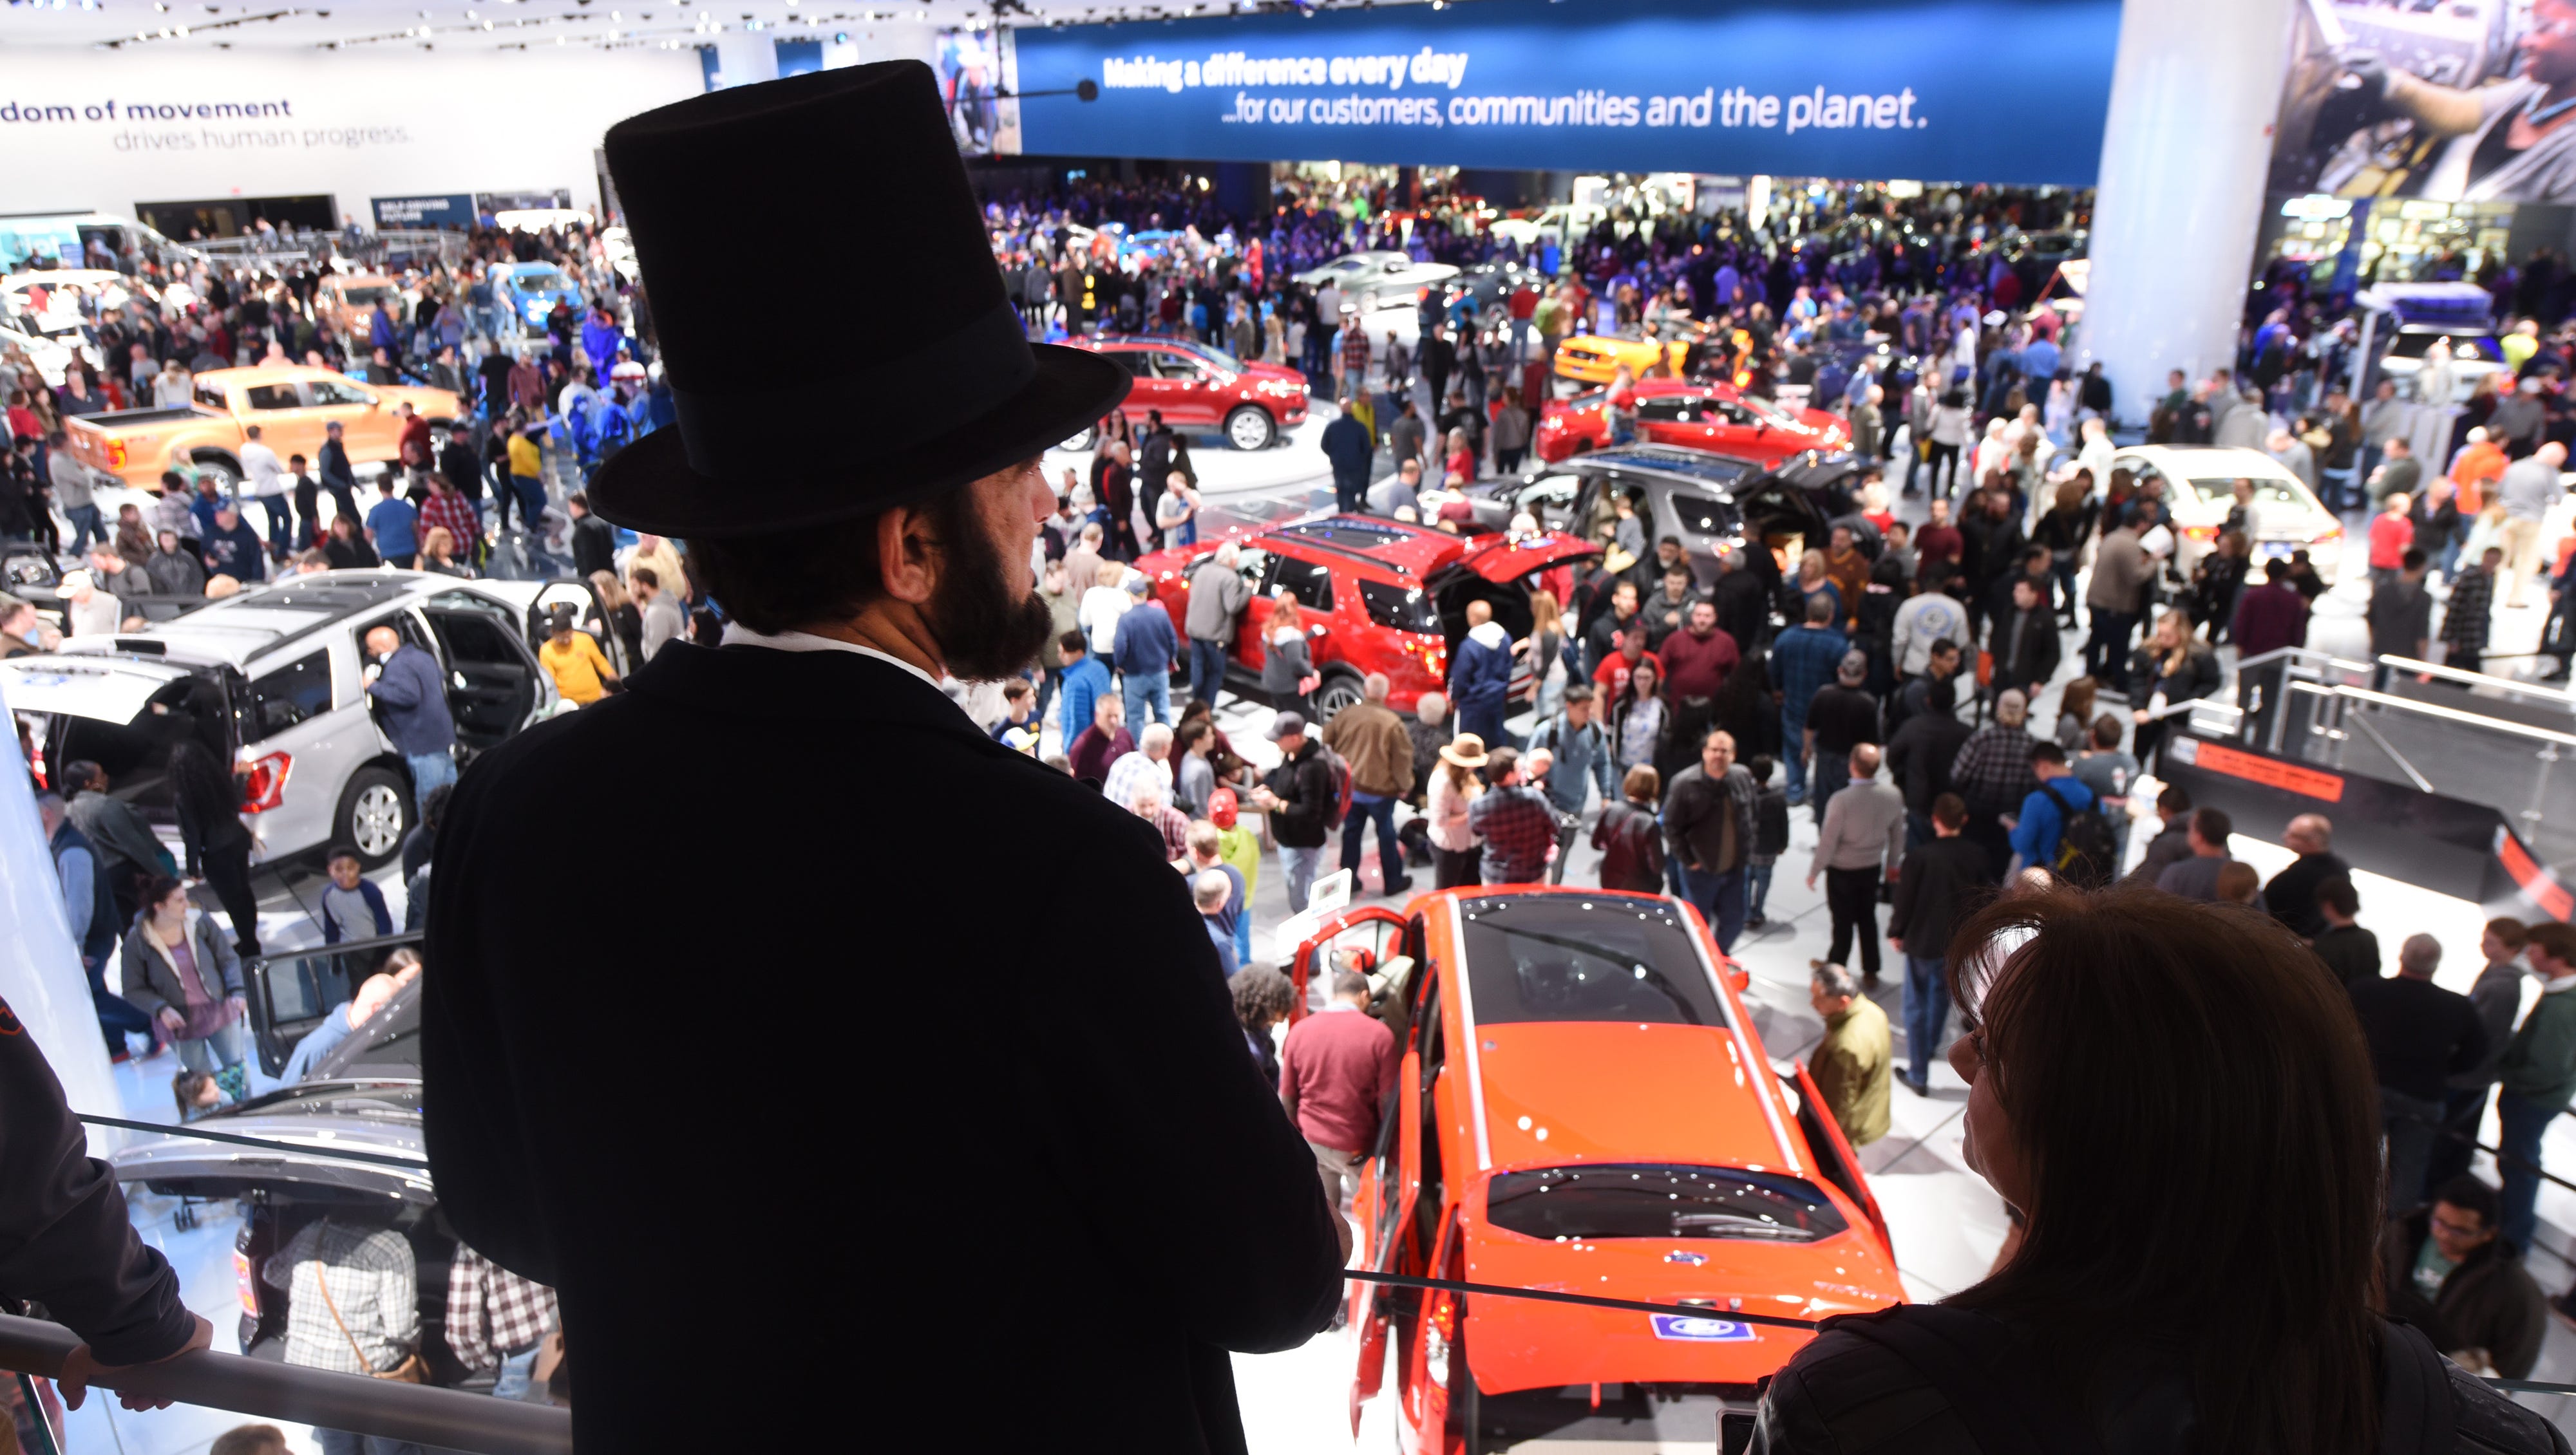 Ron Carley, professional Abraham Lincoln presenter, dons a signature top hat at the Ford Motor Company display .